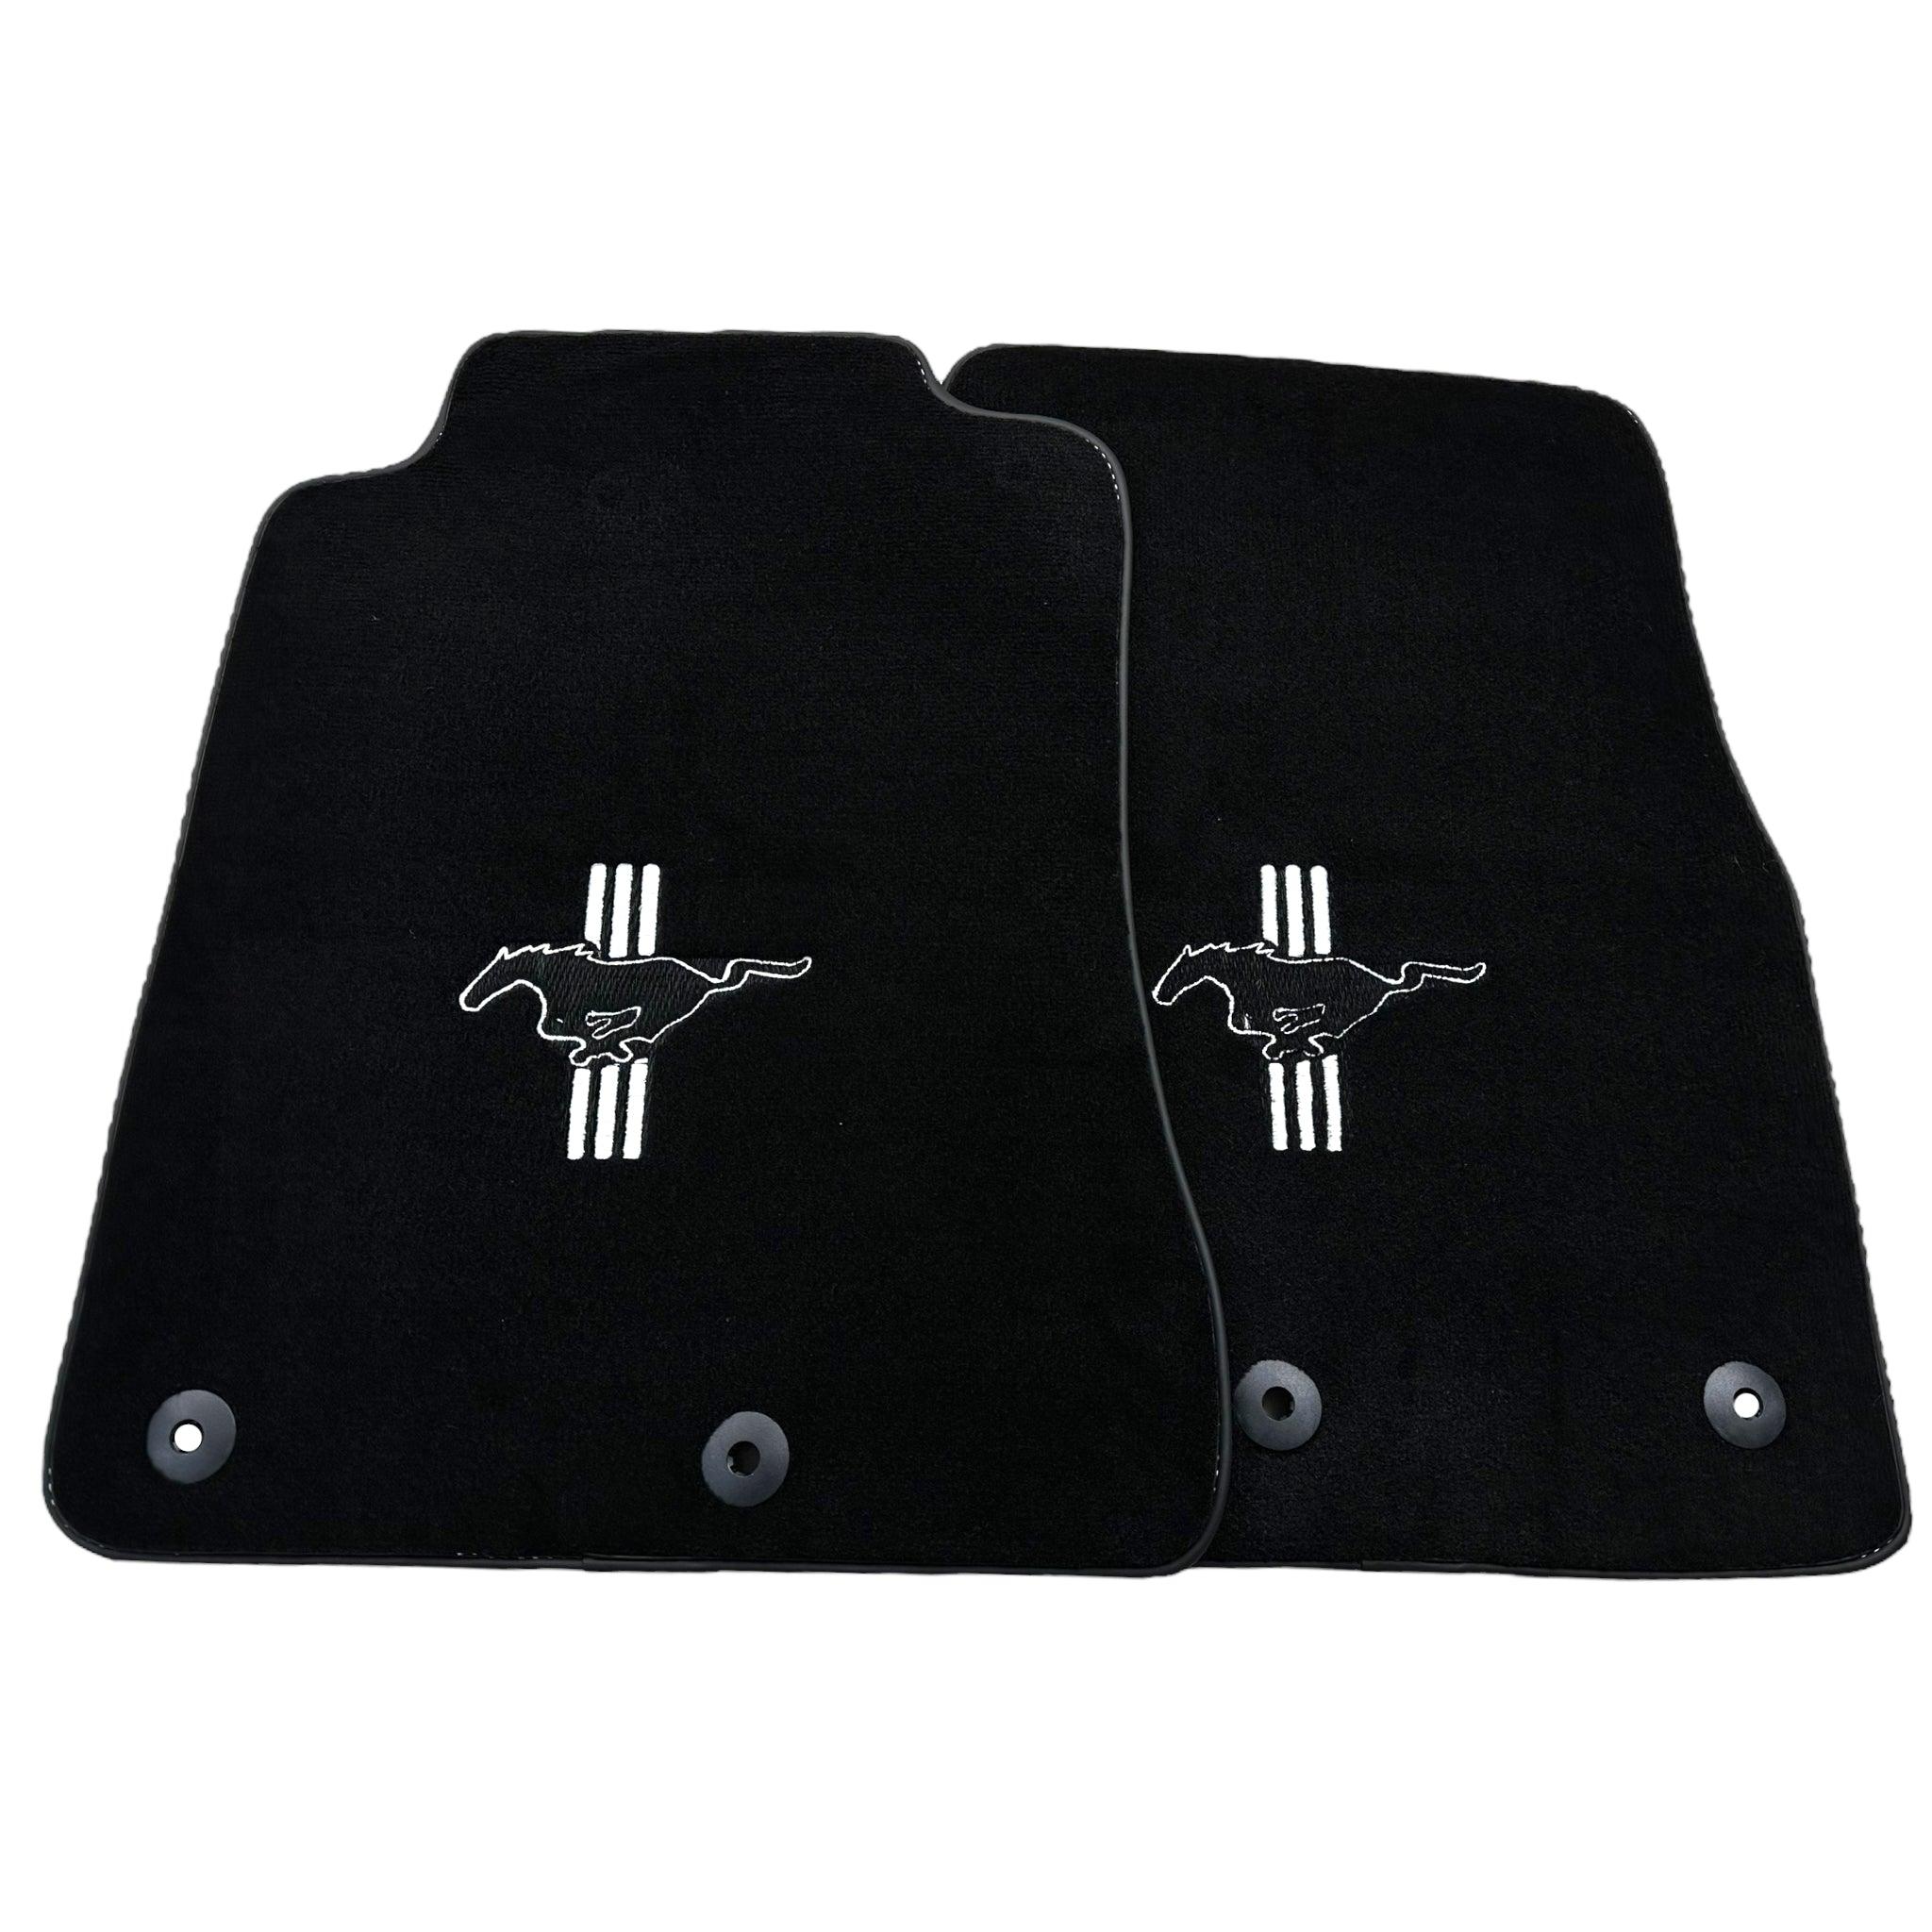 Black Floor Mats For Ford Mustang V FL (2011-2014) With Pony